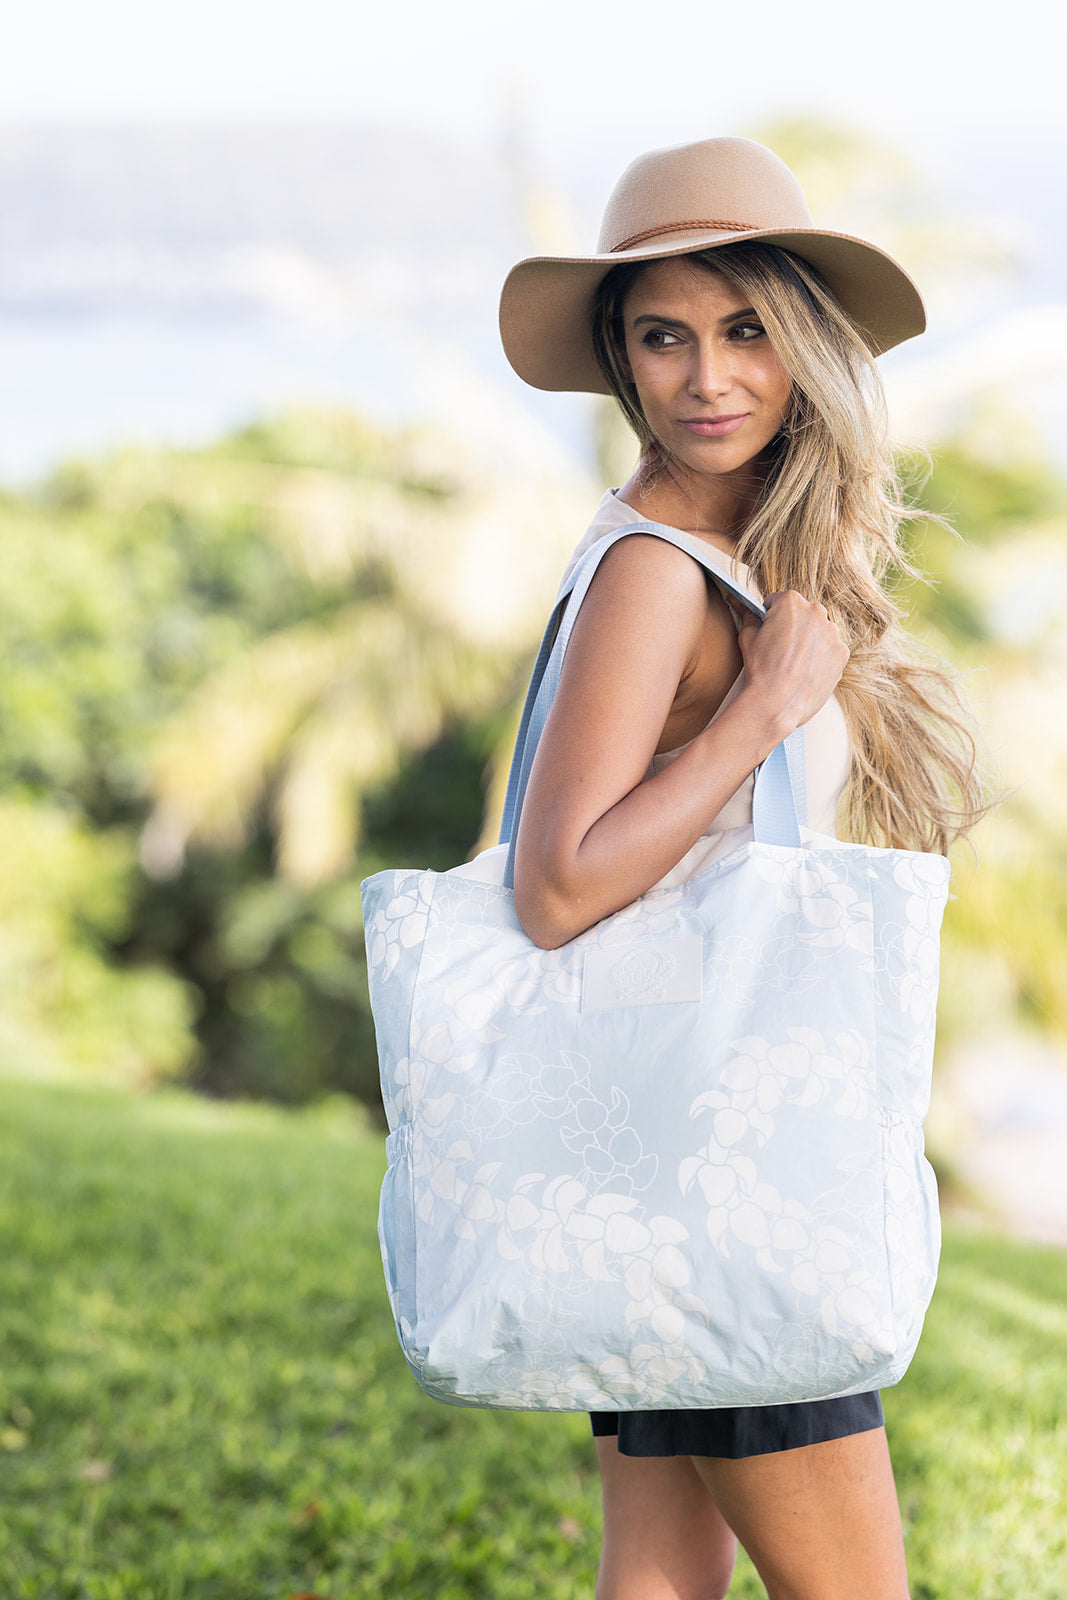 Blue and White puakenikeni flower lei design on tyvek tote held by beautiful model on a sunny day in Hawaii park. 